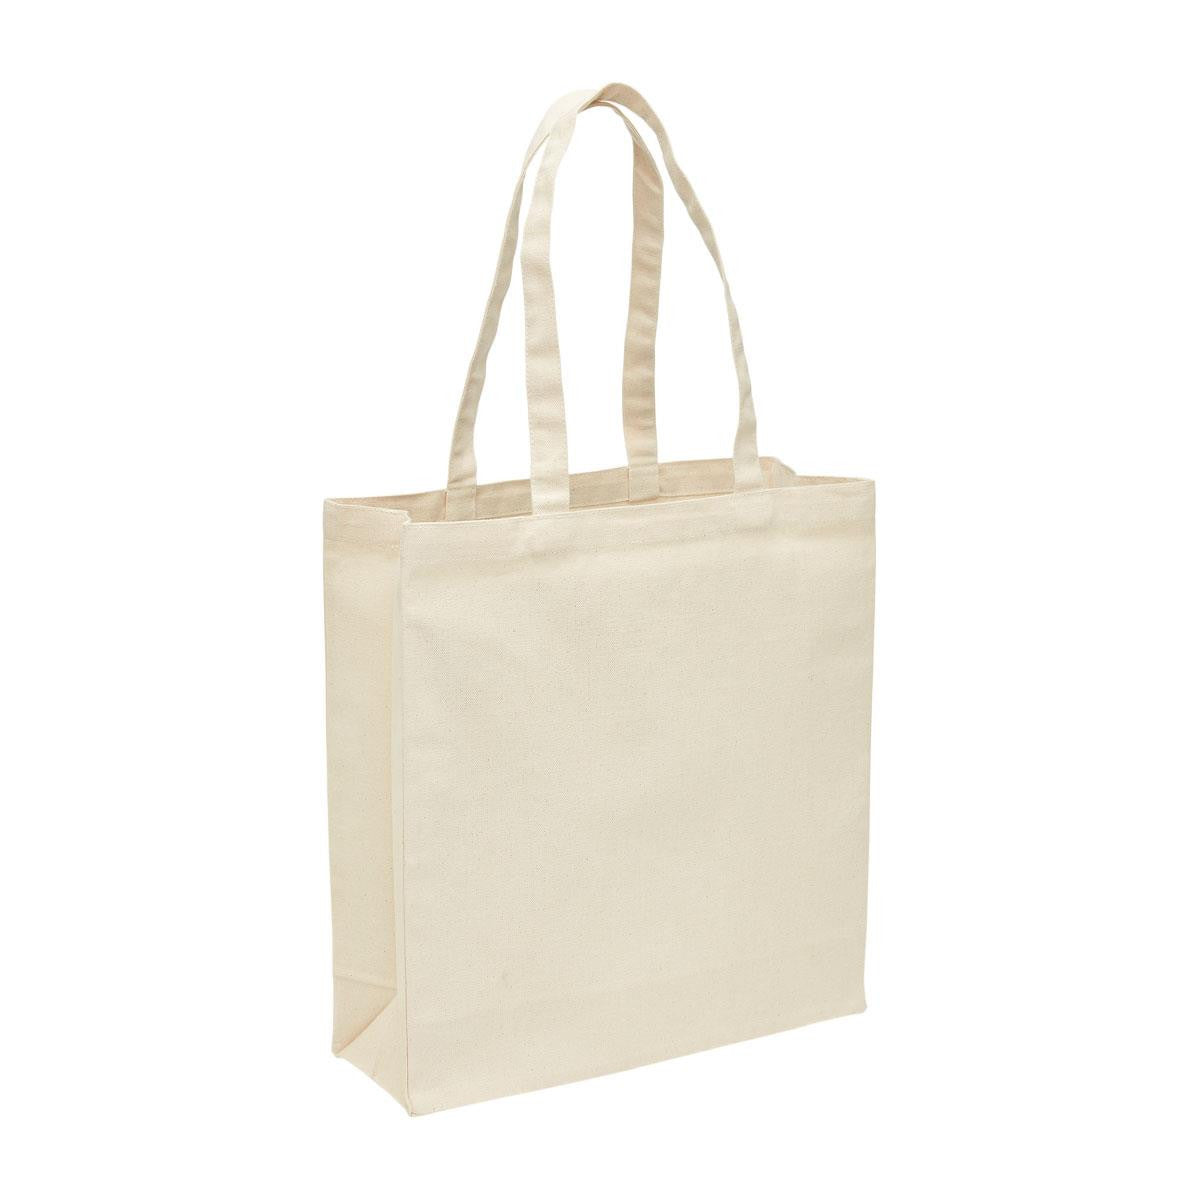 Legend Life-2002 Heavy Duty Canvas Tote with Gusset (Pack of 15)